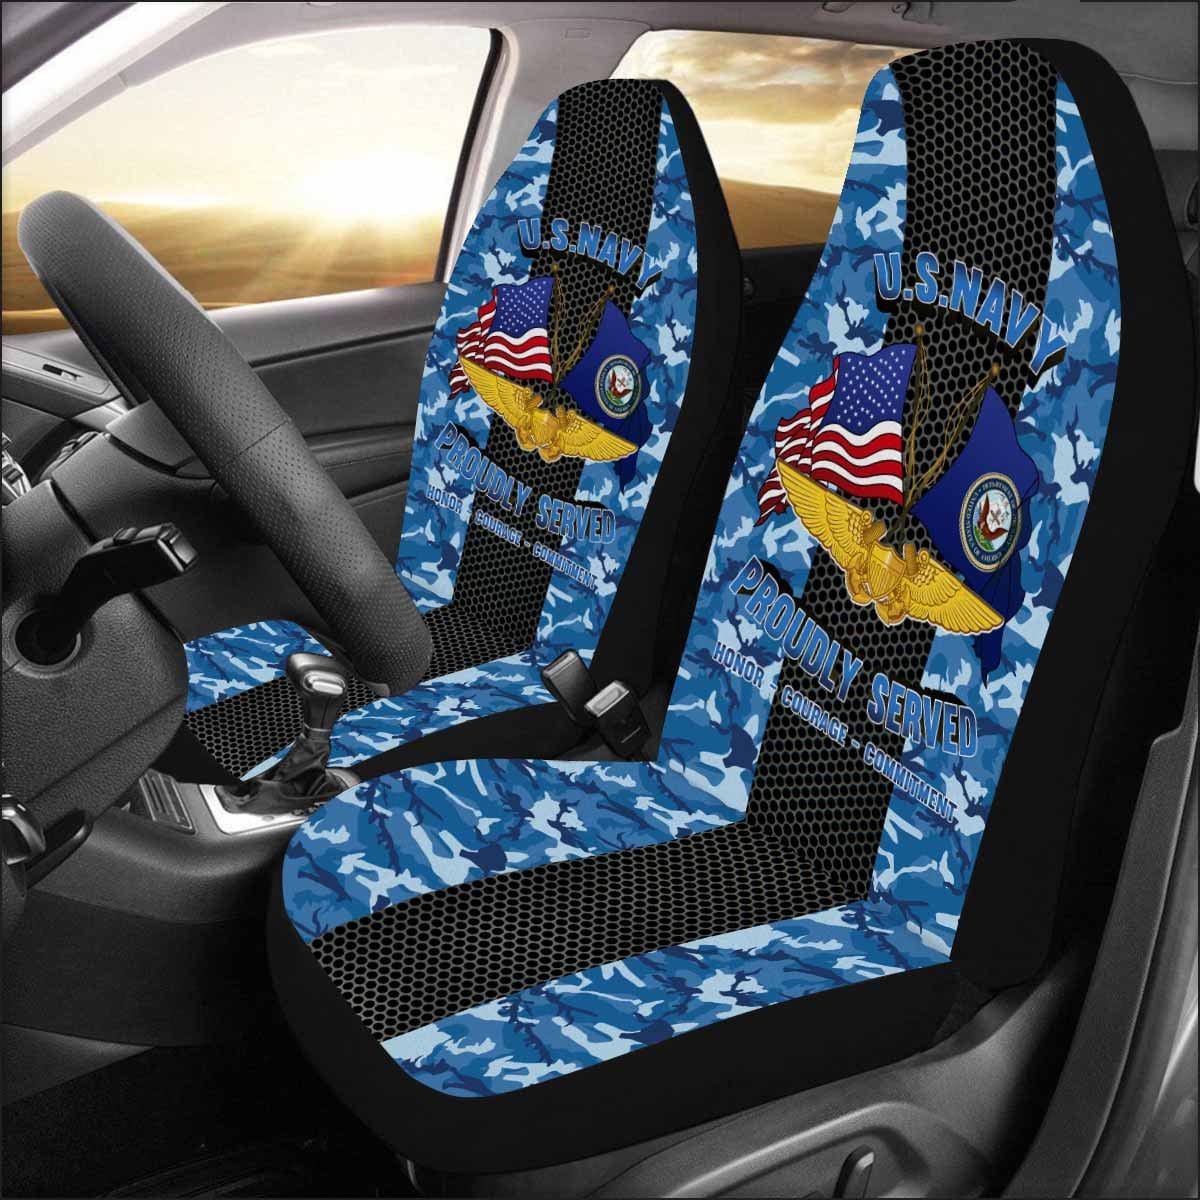 U.S NAVY NAVAL FLIGHT OFFICER Car Seat Covers (Set of 2)-SeatCovers-Navy-Badge-Veterans Nation